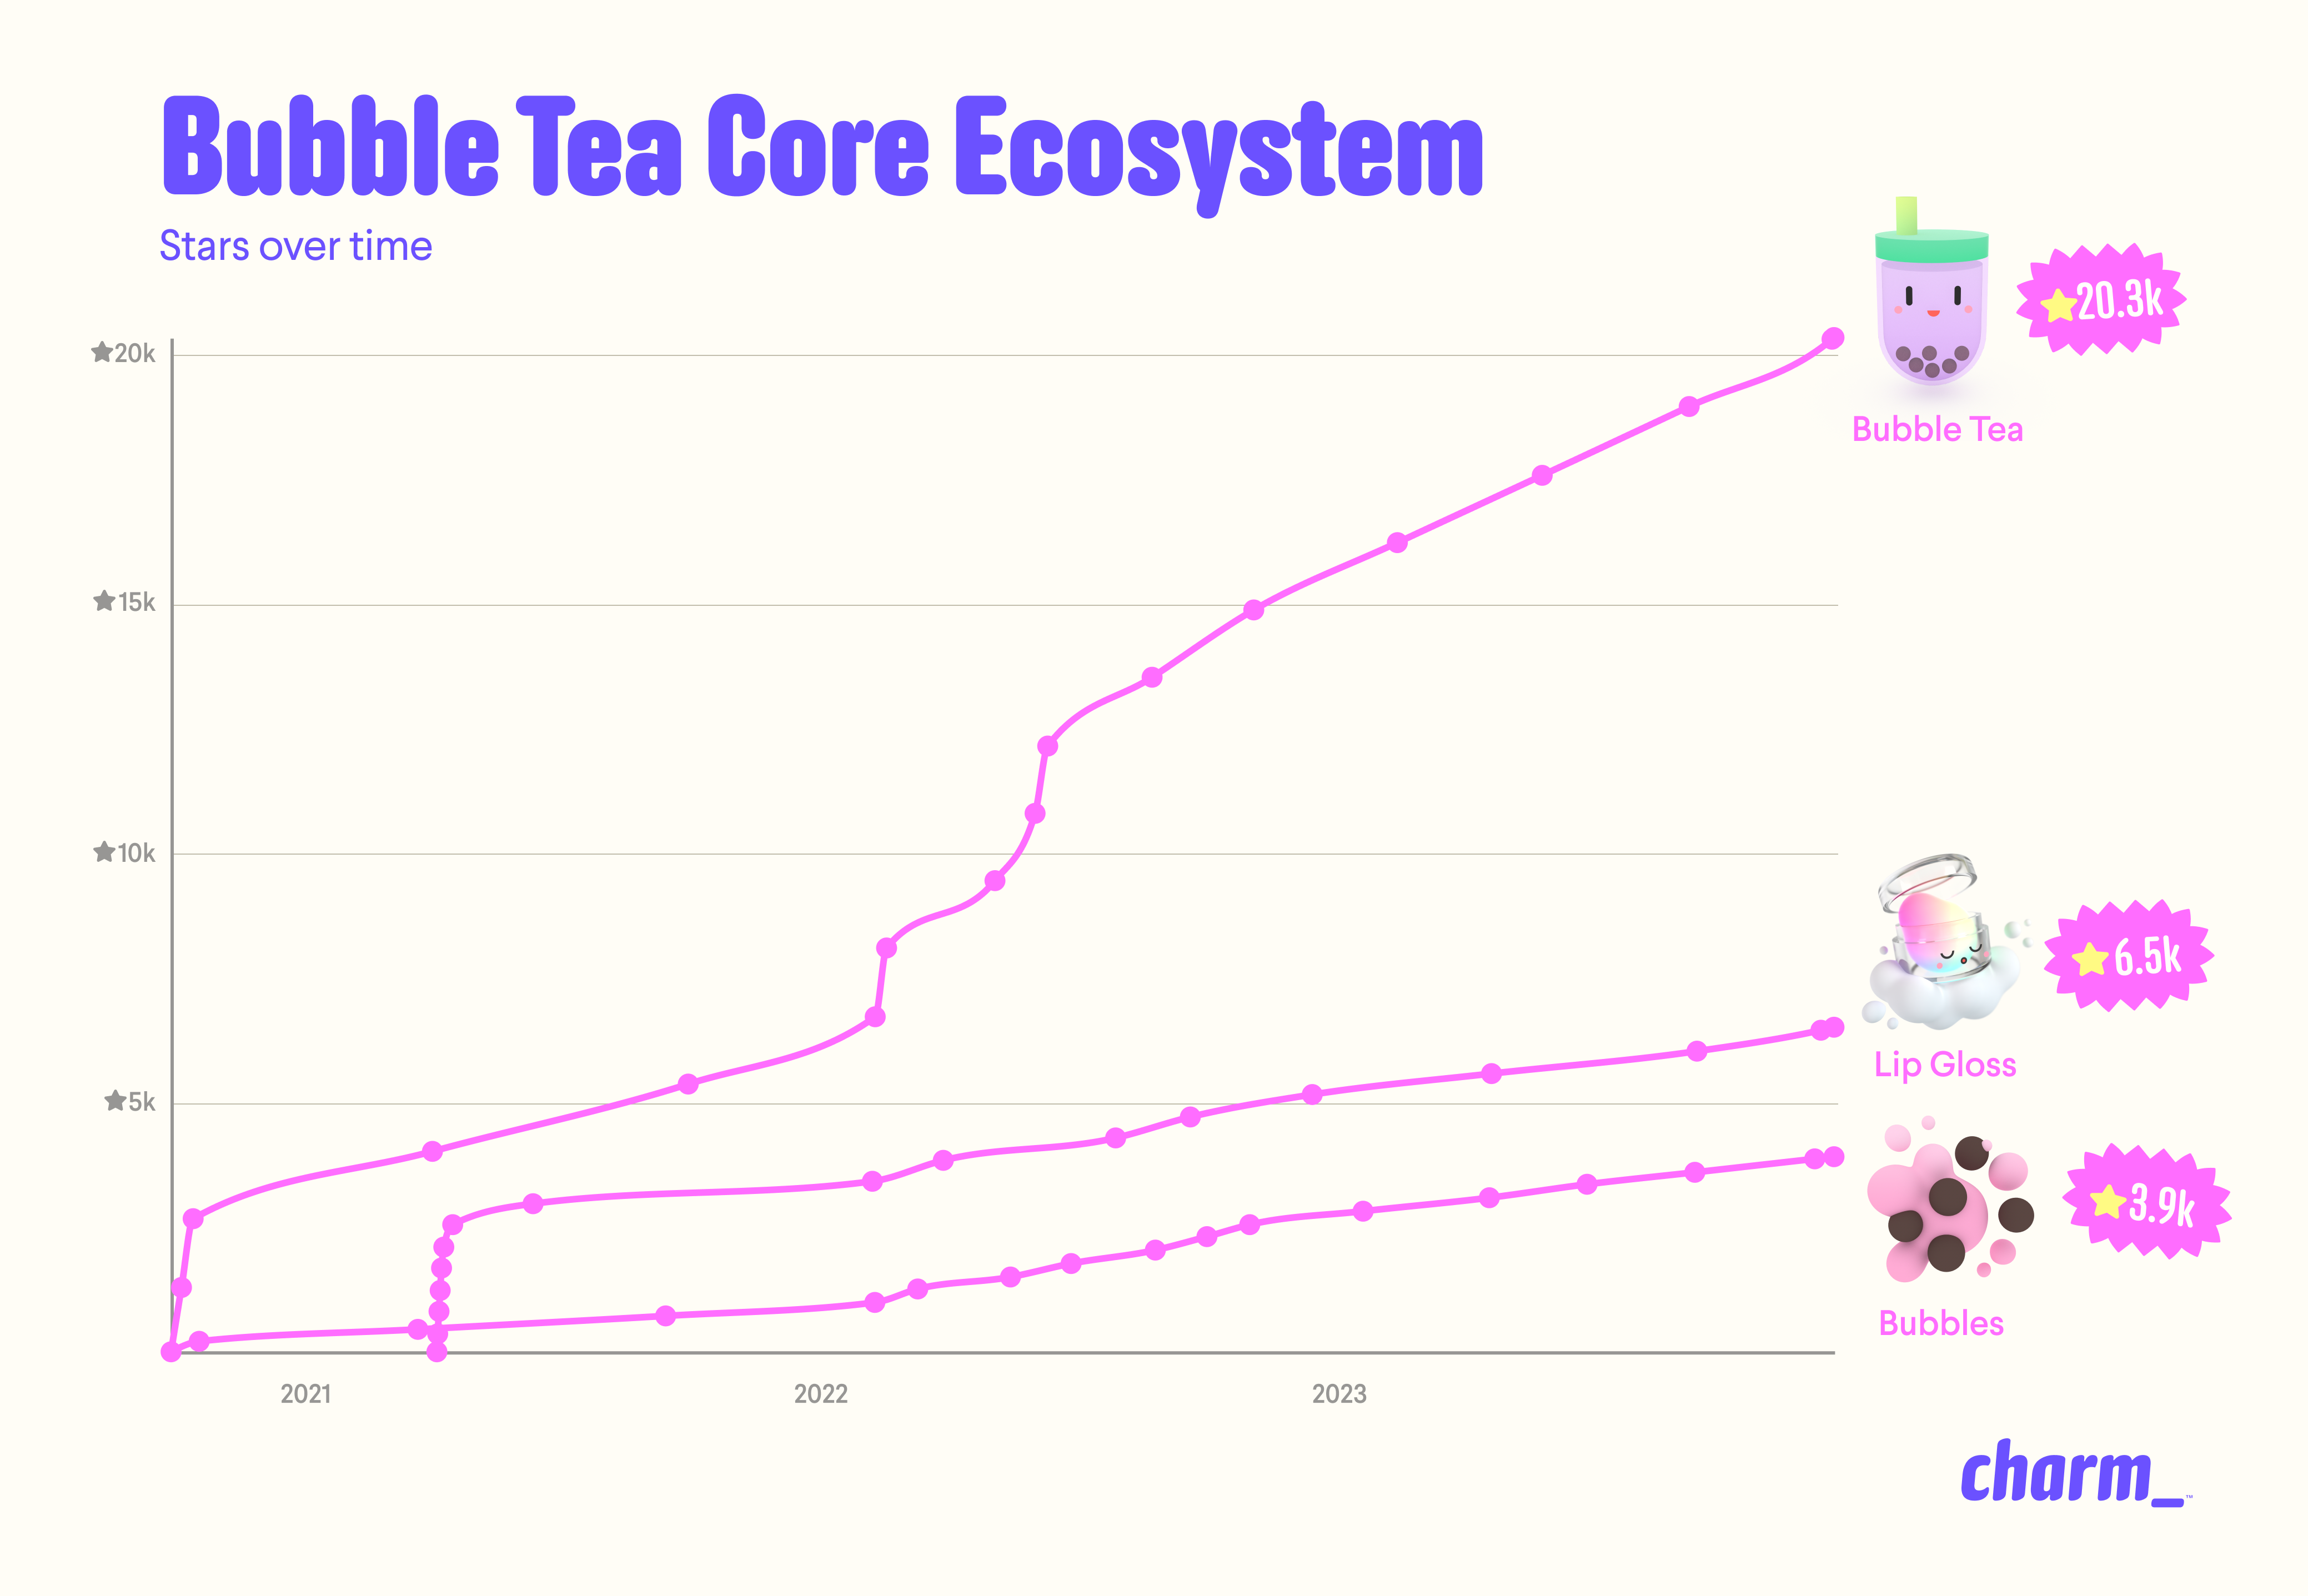 Chart showing Bubble Tea ecosystem growth, in terms of GitHub stars over time